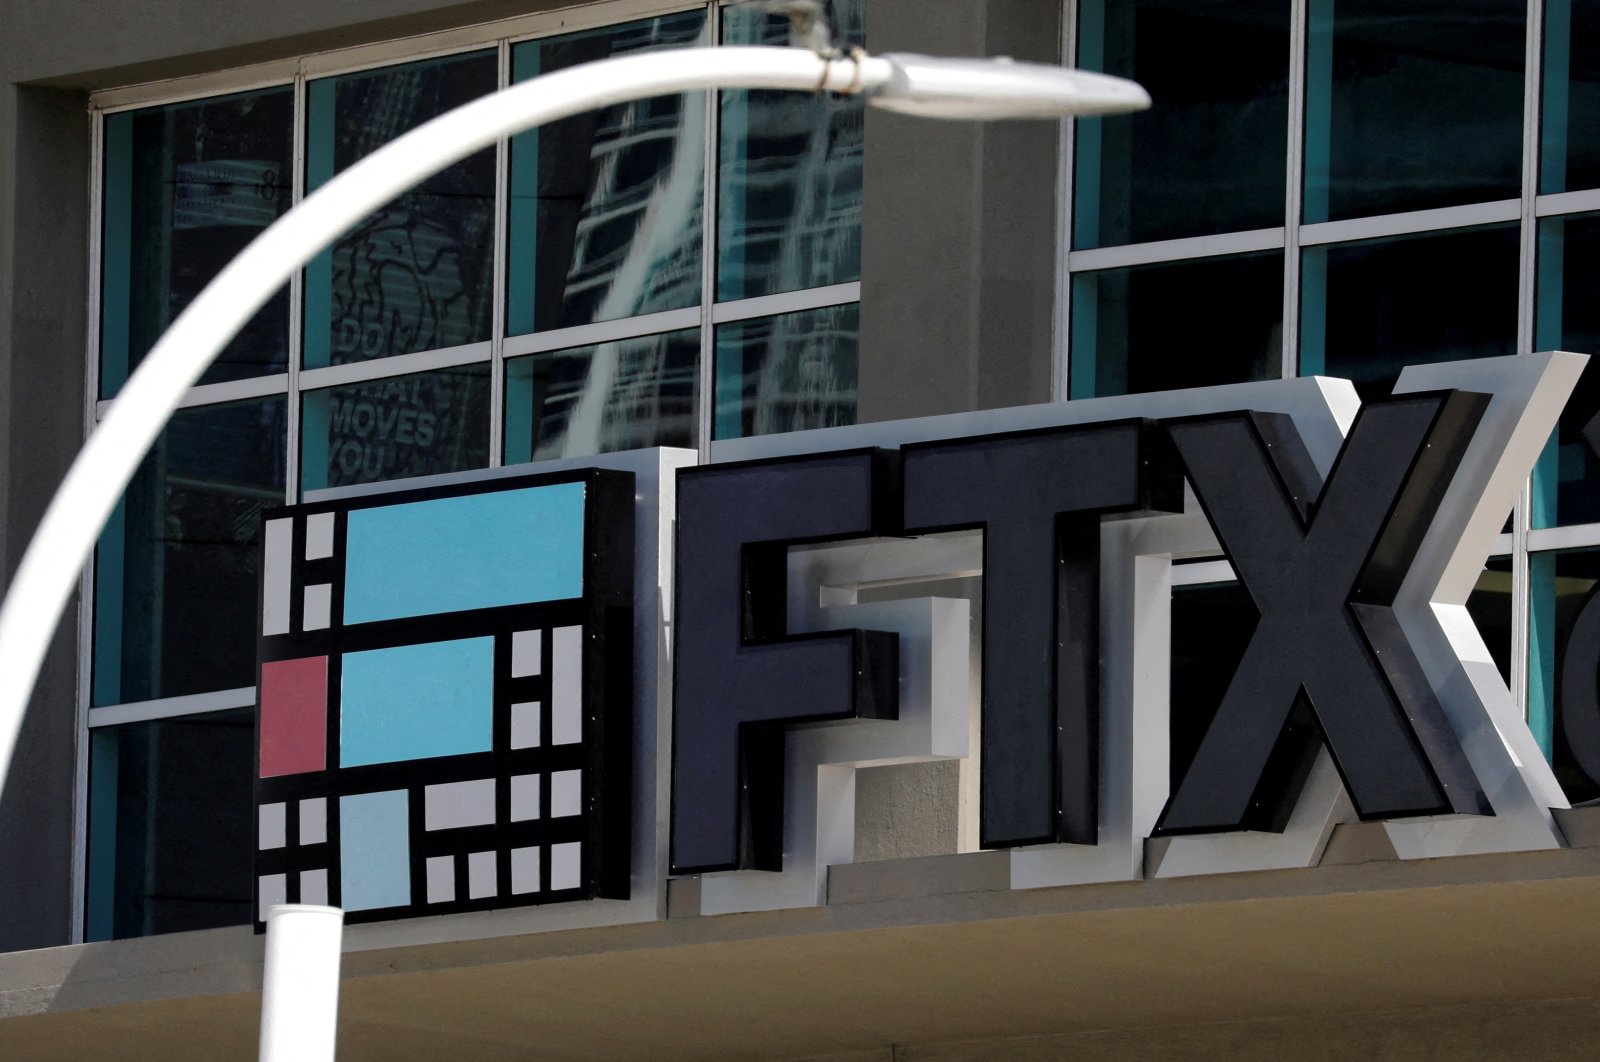 The logo of FTX is seen at the entrance of the FTX Arena in Miami, Florida, U.S., Nov. 12, 2022. (Reuters Photo)